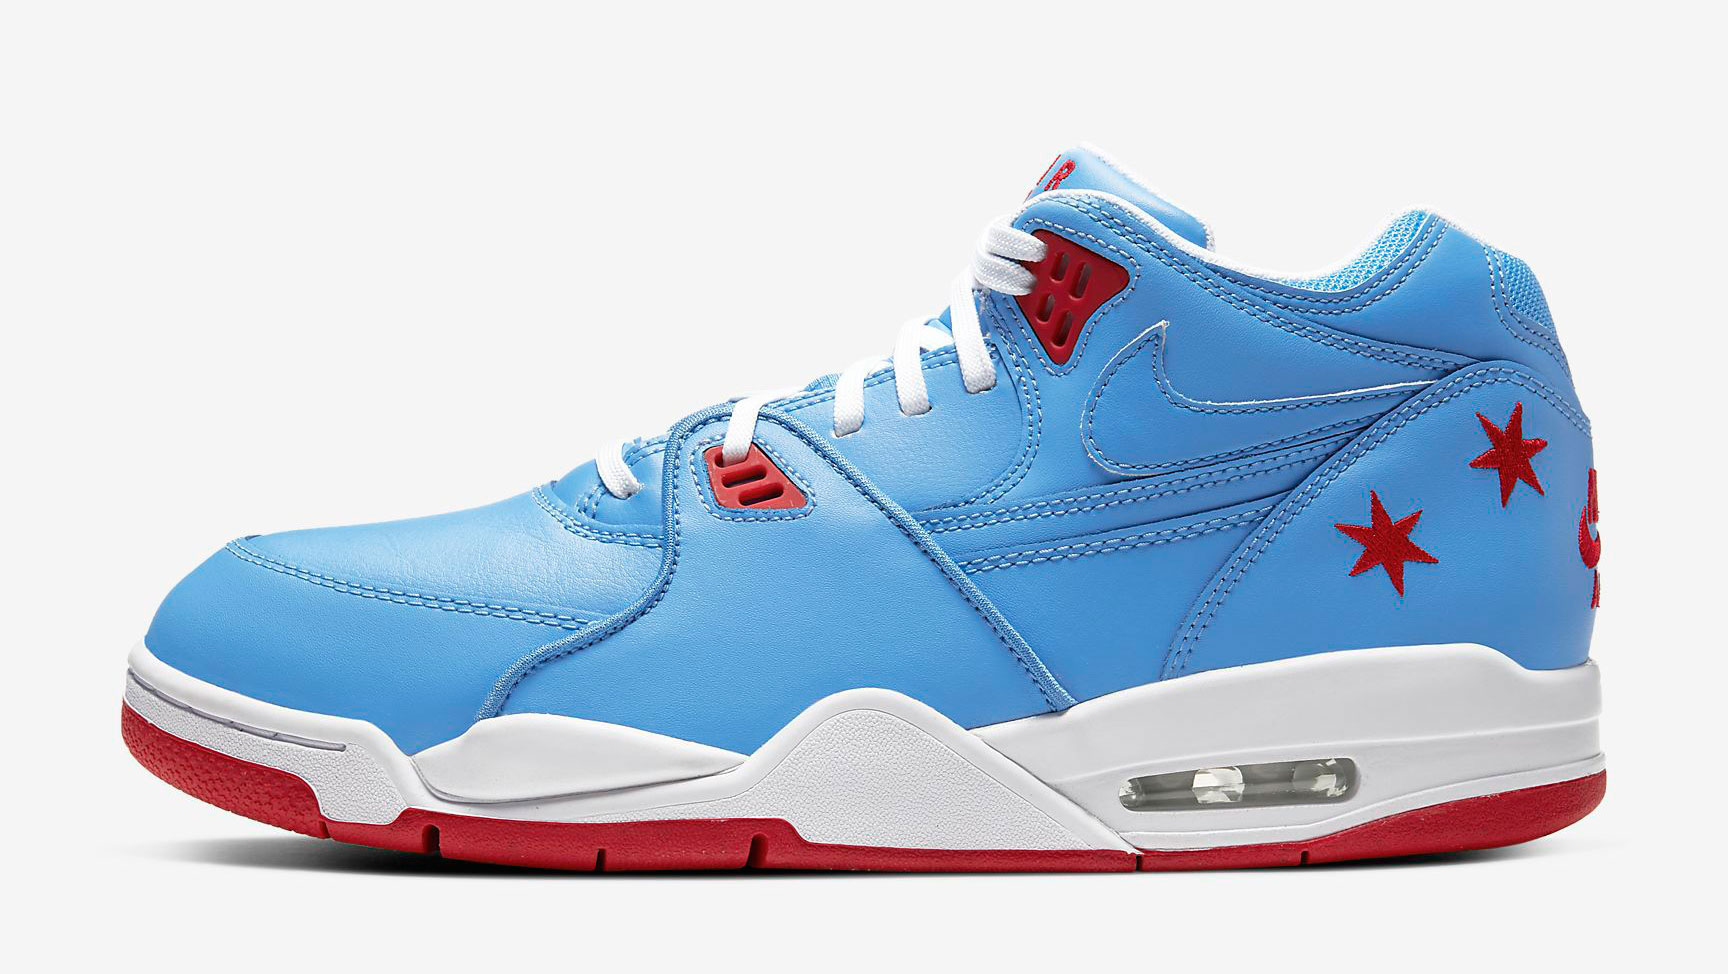 nike-air-flight-89-chicago-where-to-buy